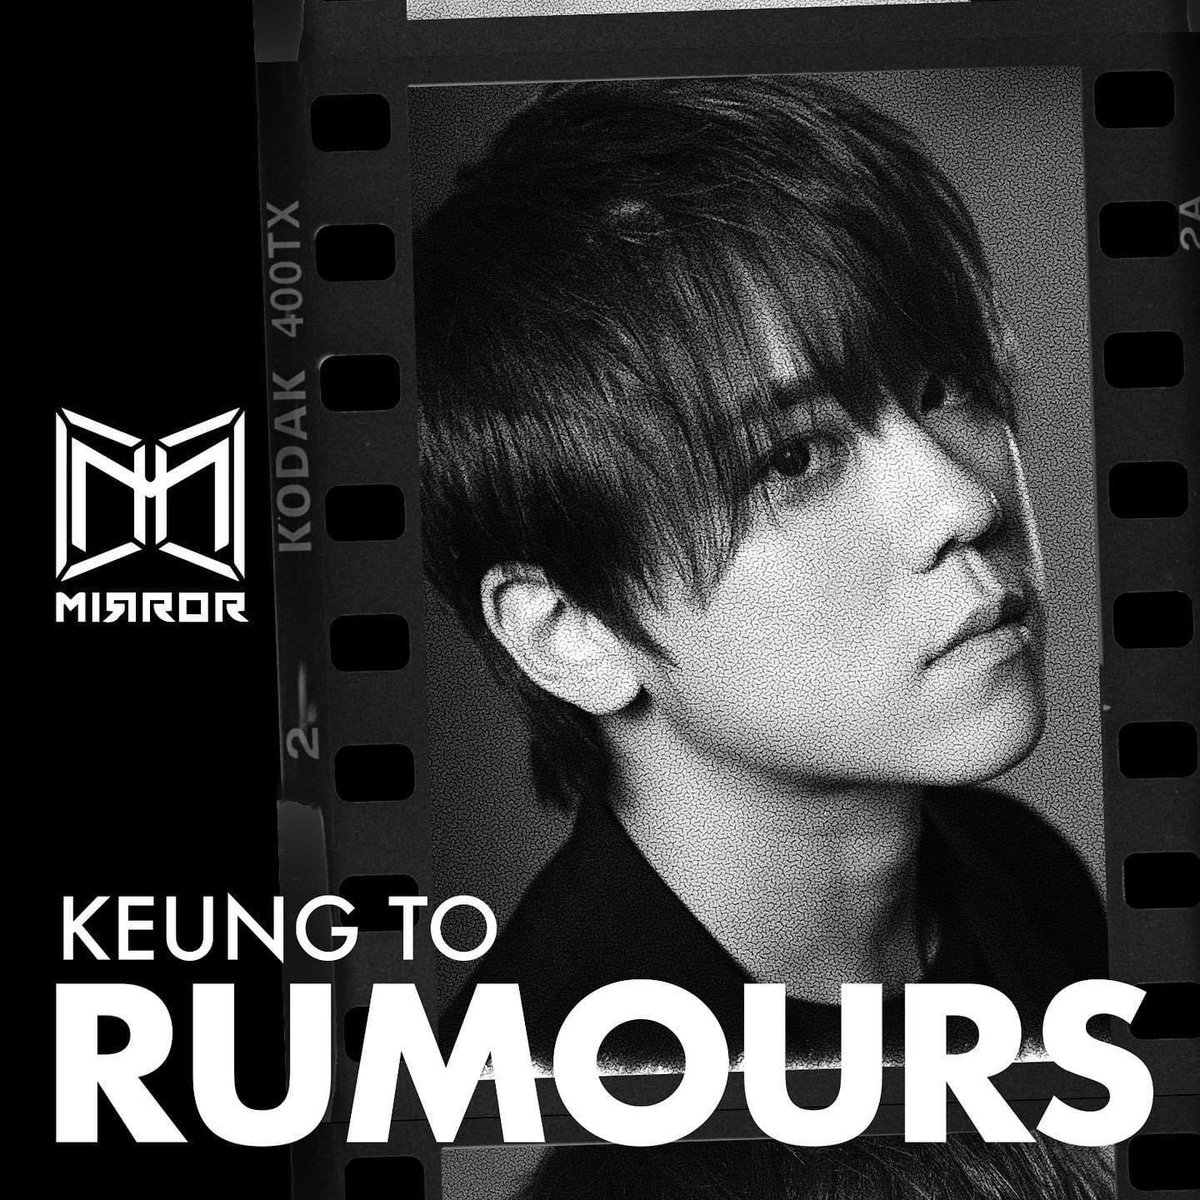 @MIRROR_weare Can't wait for MIRROR's English debut❤️ Support #KeungTo & all members❤️ #mirrorrumours #MIRROR_weare